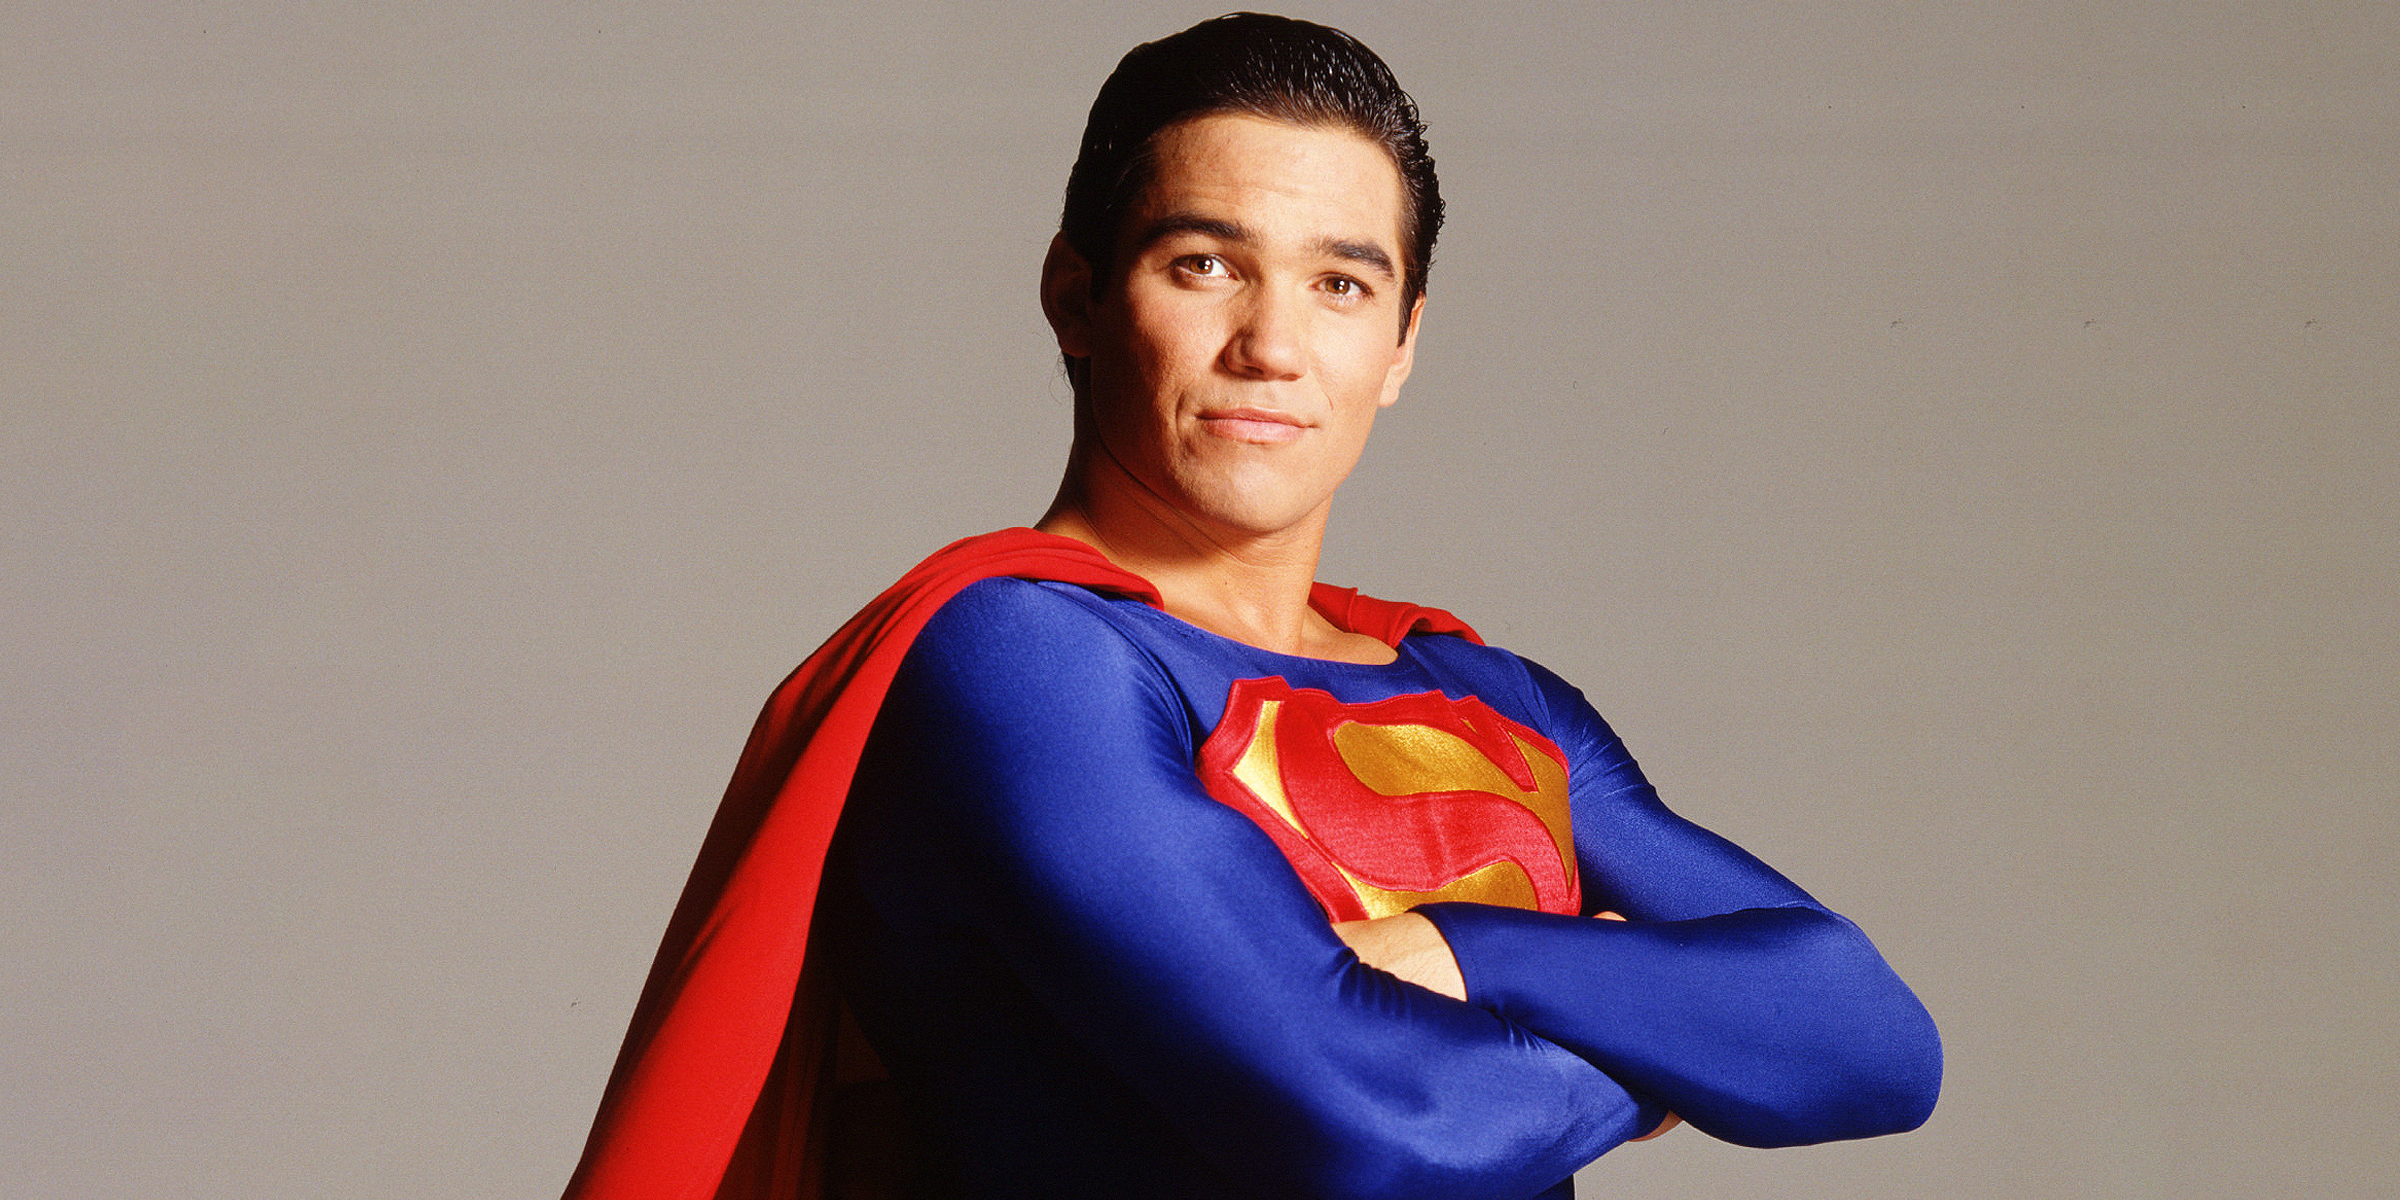 Dean Cain | Source: Getty Images